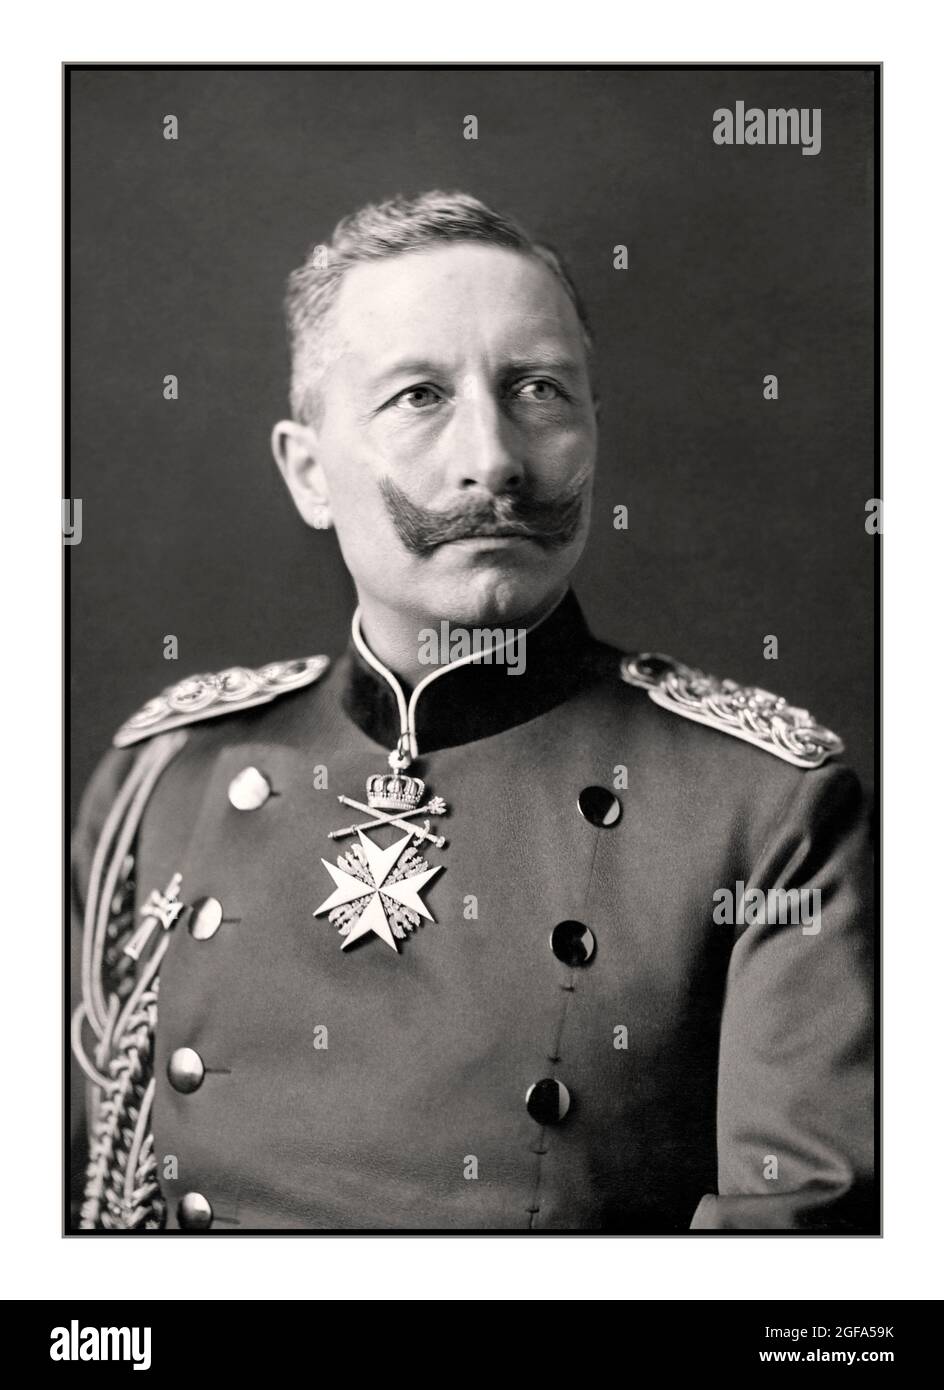 Kaiser Wilhelm II (Friedrich Wilhelm Viktor Albert; 27 January 1859 – 4 June 1941), anglicised as William II, was the last German Emperor (Kaiser) and King of Prussia, reigning from 15 June 1888 until his abdication on 9 November 1918. Wilhelm's turbulent reign culminated in Germany's guarantee of military support to Austria-Hungary during the crisis of July 1914, one of the direct causes for World War I. A lax wartime leader, Wilhelm left virtually all decision-making regarding strategy and organisation of the war effort to the German Army's Great General Staff. Portrait by T. H. Voigt, 1902 Stock Photo